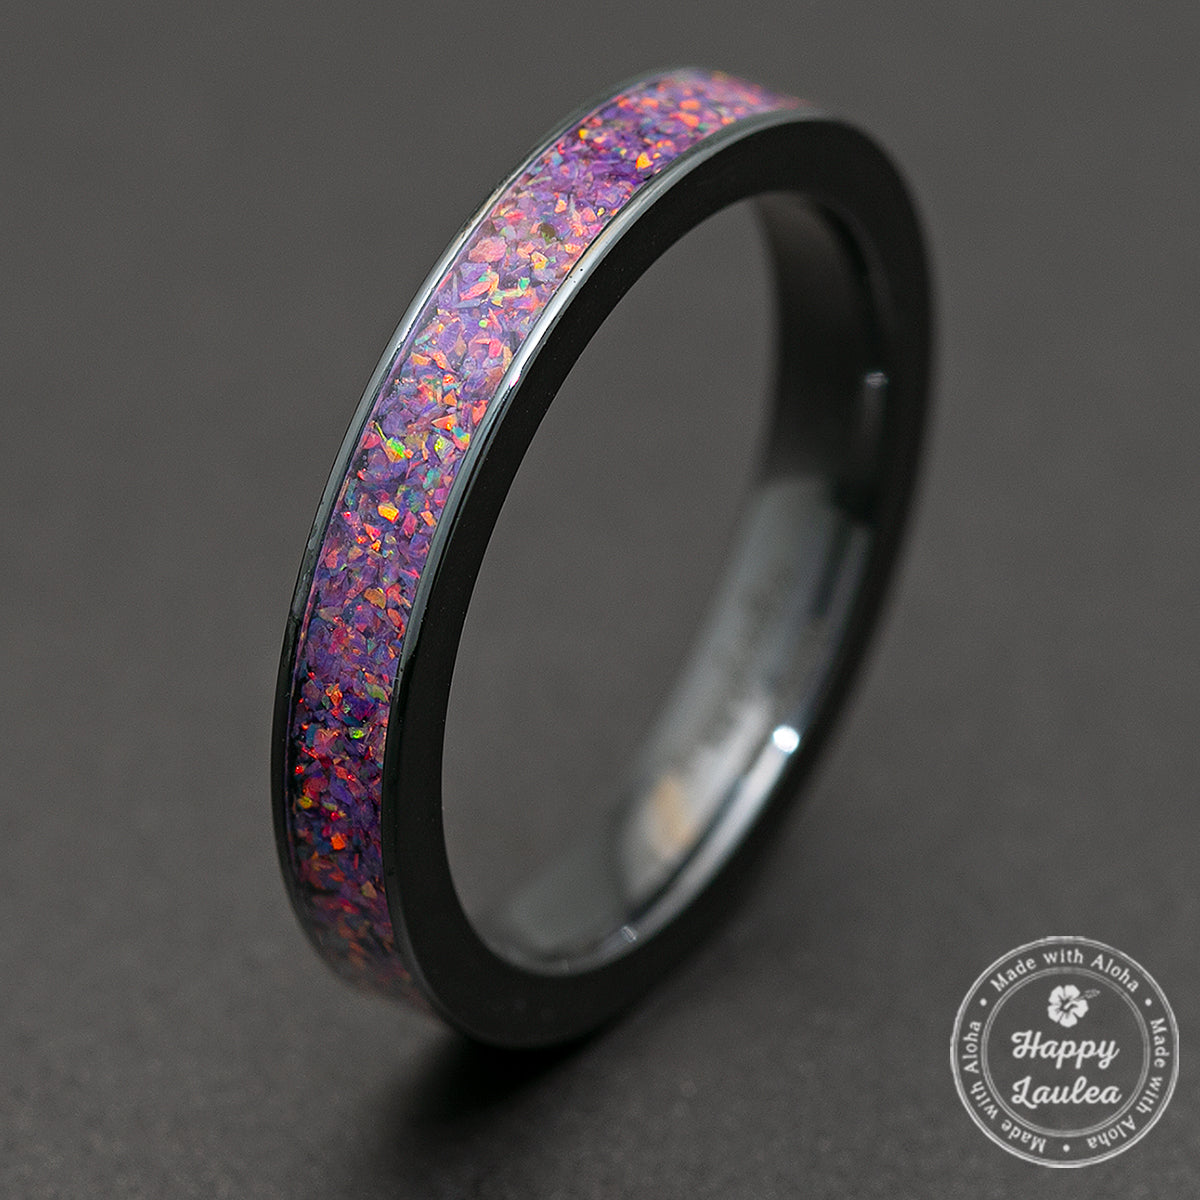 Zirconium Ring with Lavender Fire Opal Inlay / 4mm / Flat Shape / Comfort Fitment